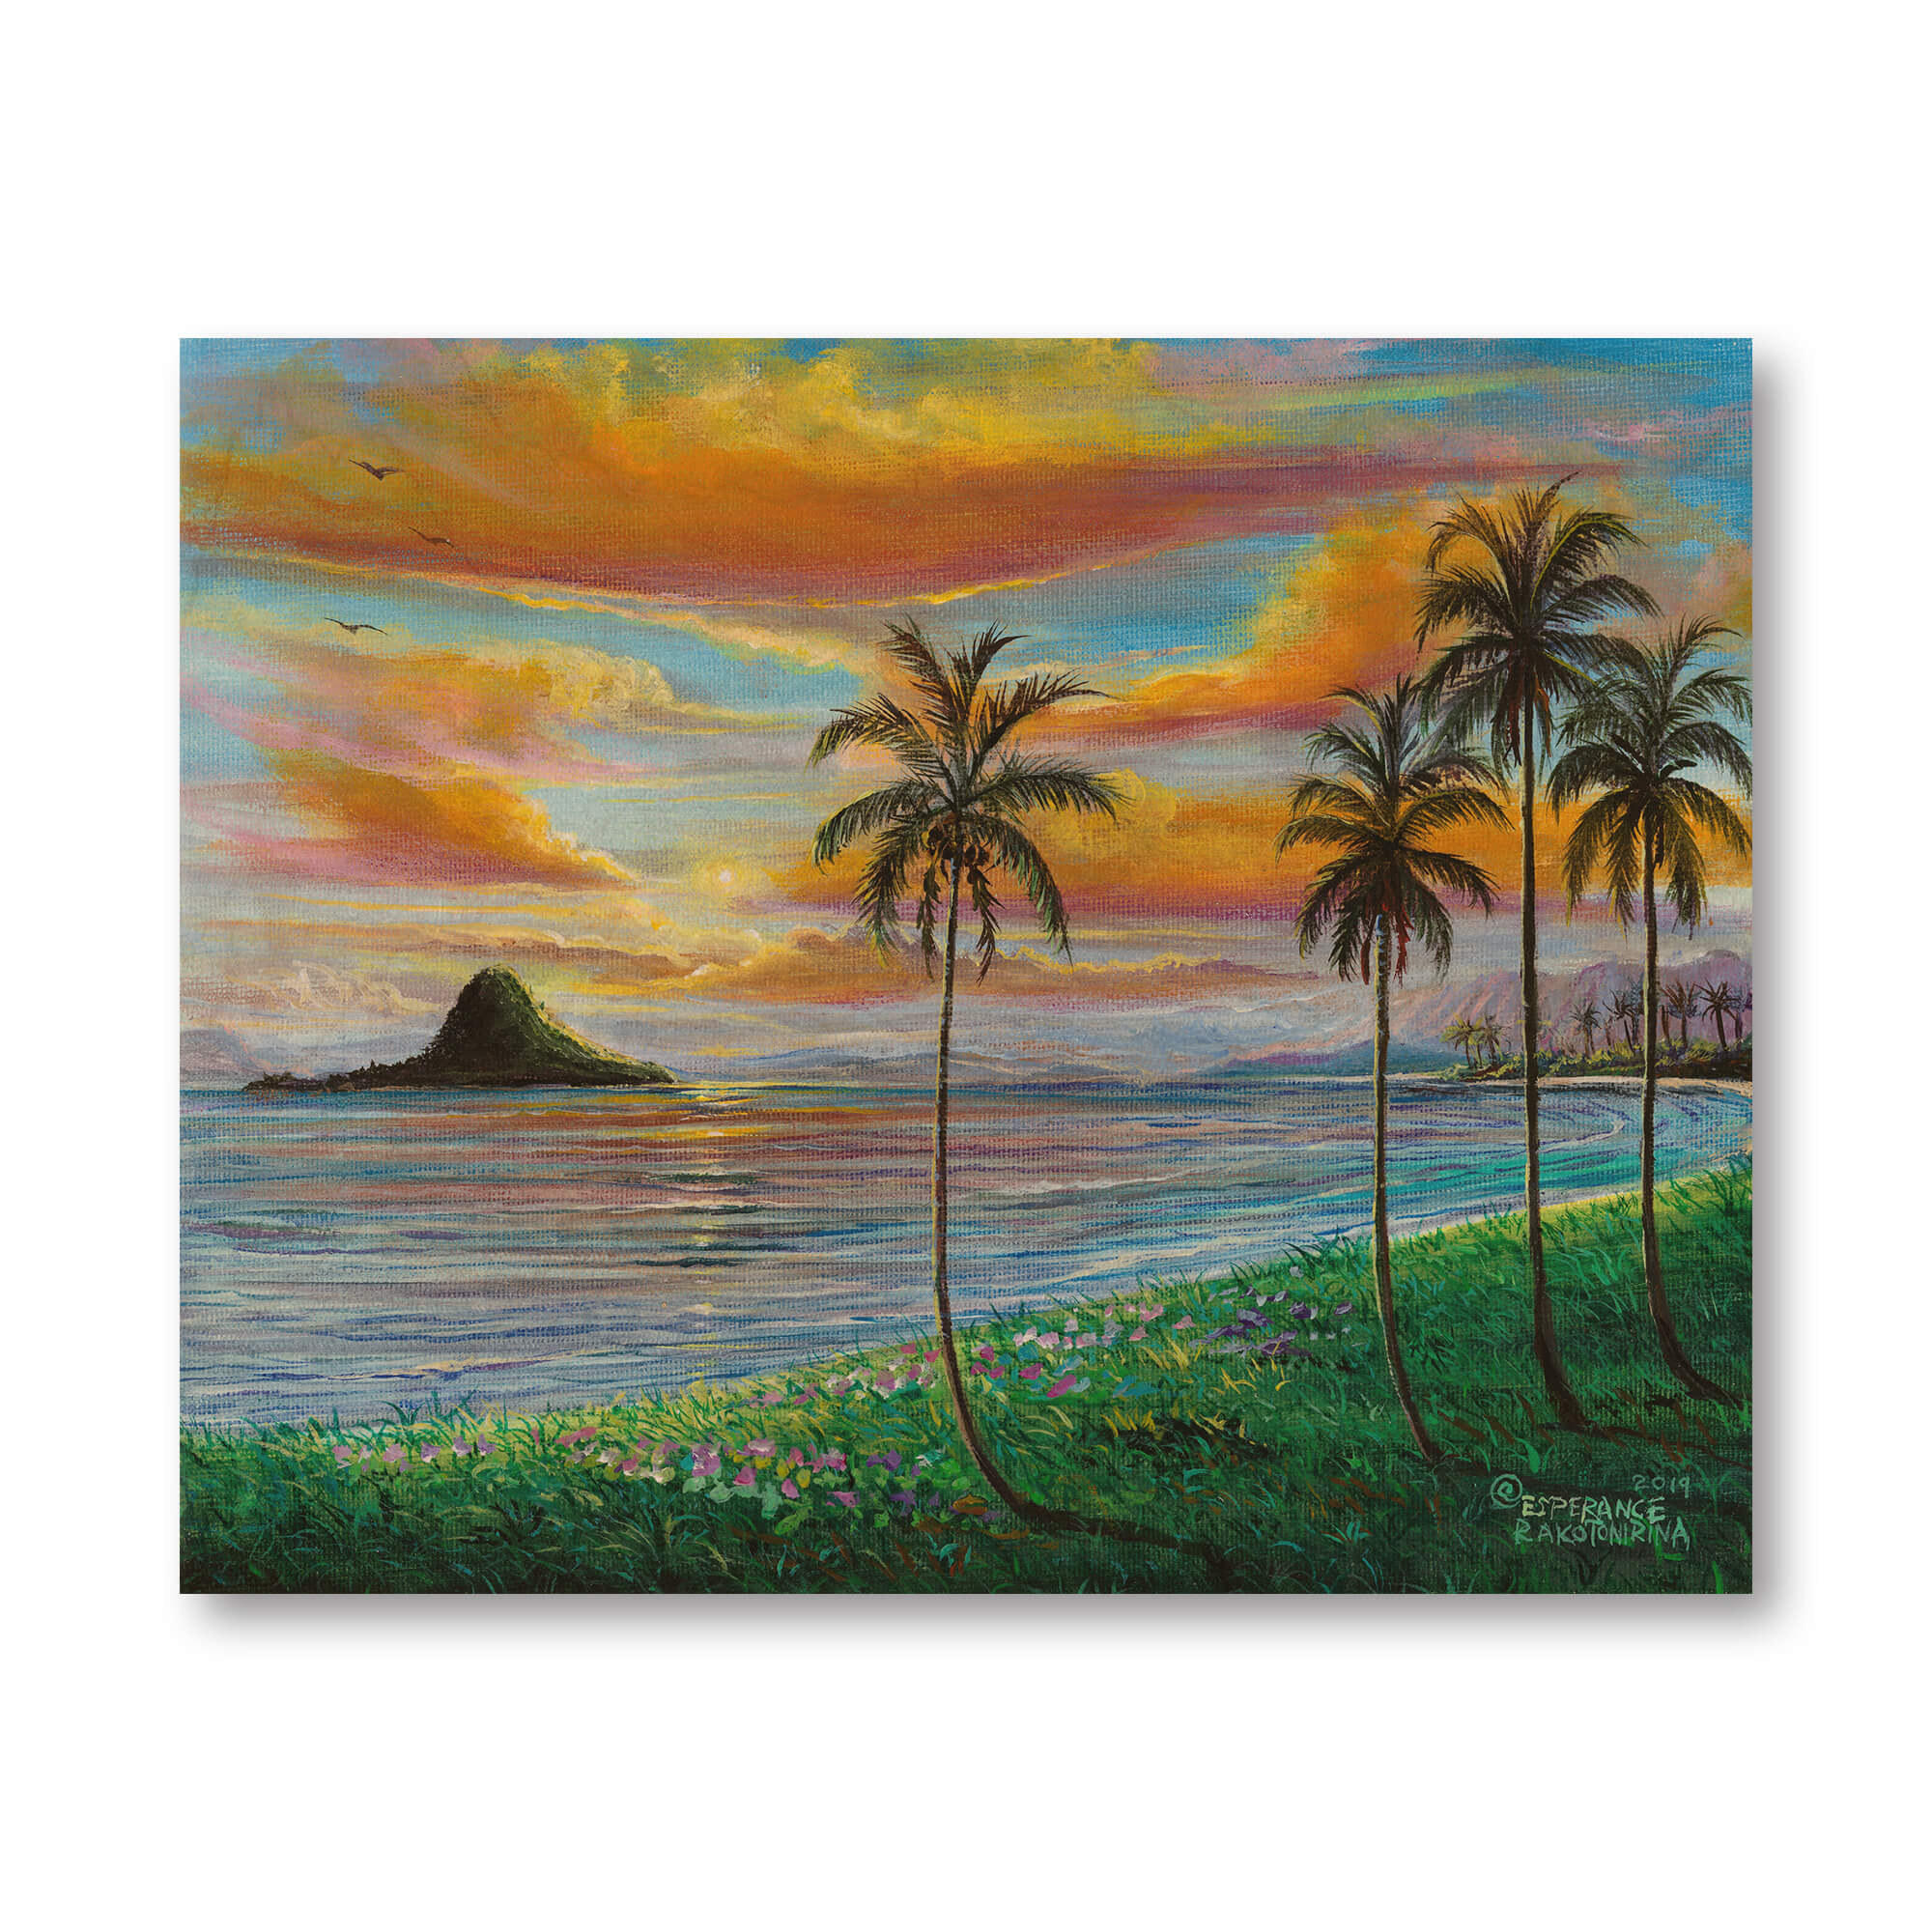 Wood print a breathtaking sunset with vibrant colors of orange, yellow, and pink reflecting on the water by hawaii artist Esperance Rakotonirina